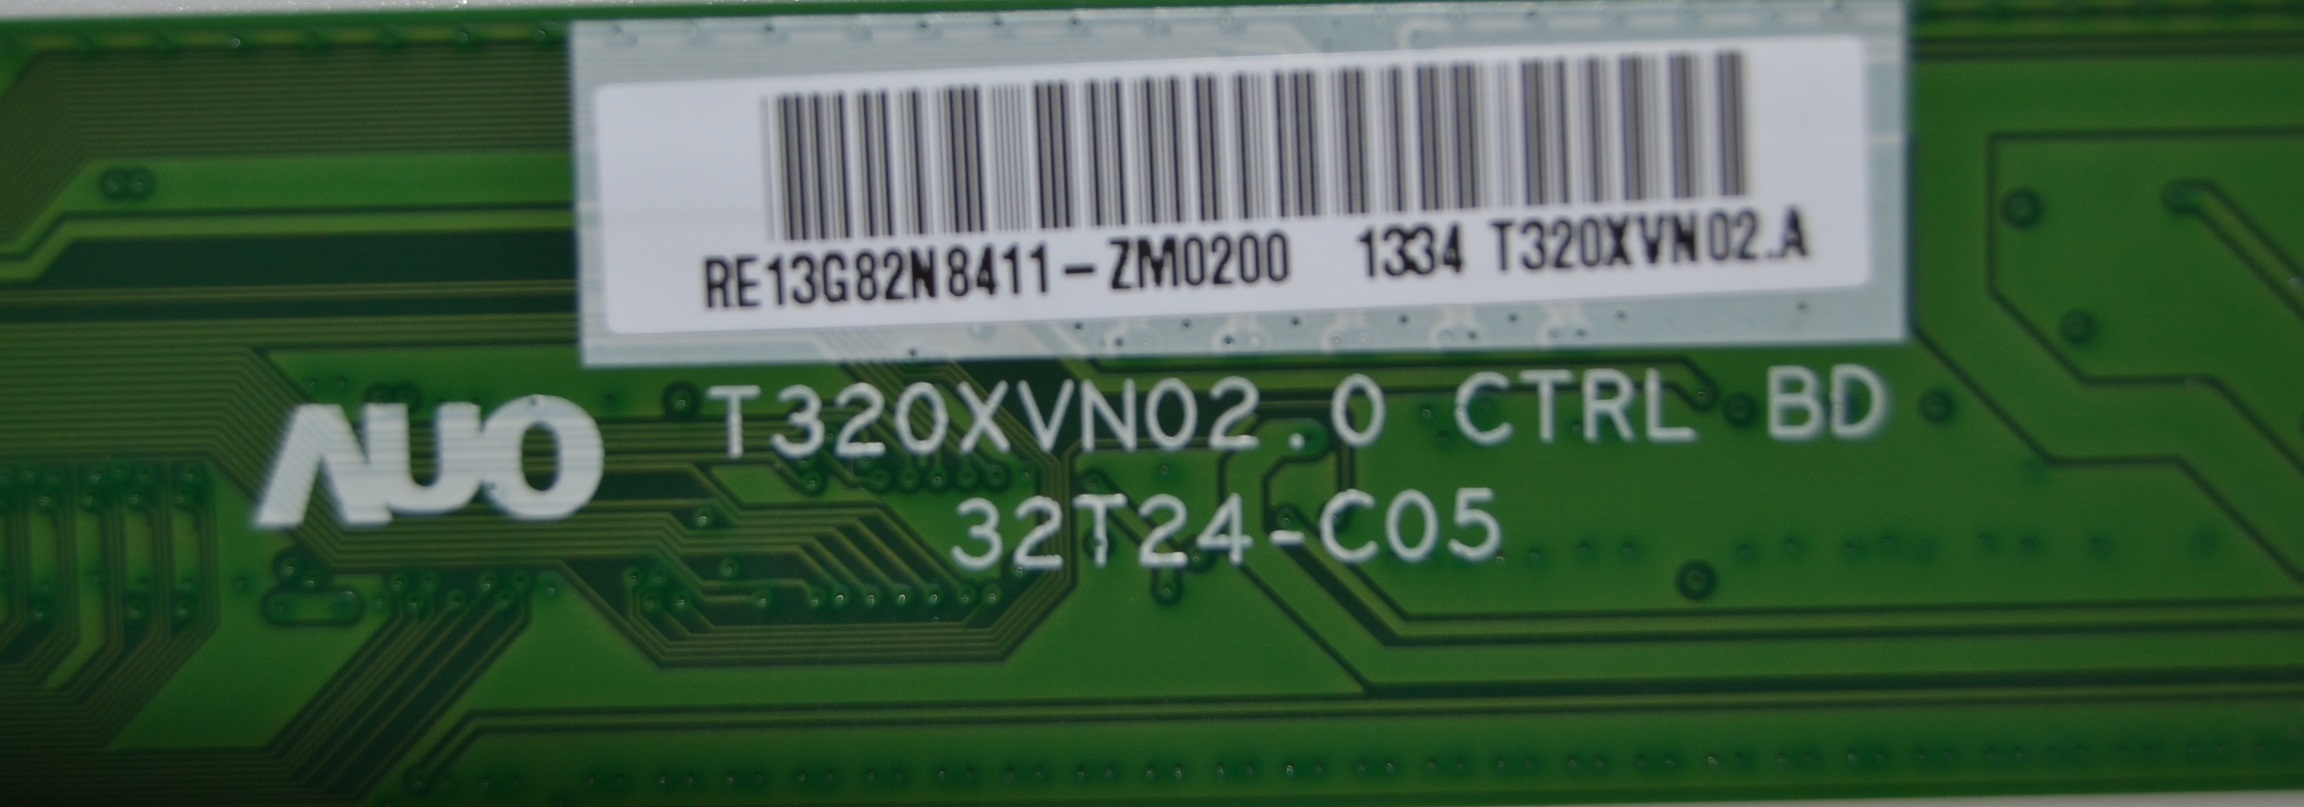 PAN/32INC/AUO/1 LCD панел ,AUO,T320HVN02.A,CX315DLEDM,